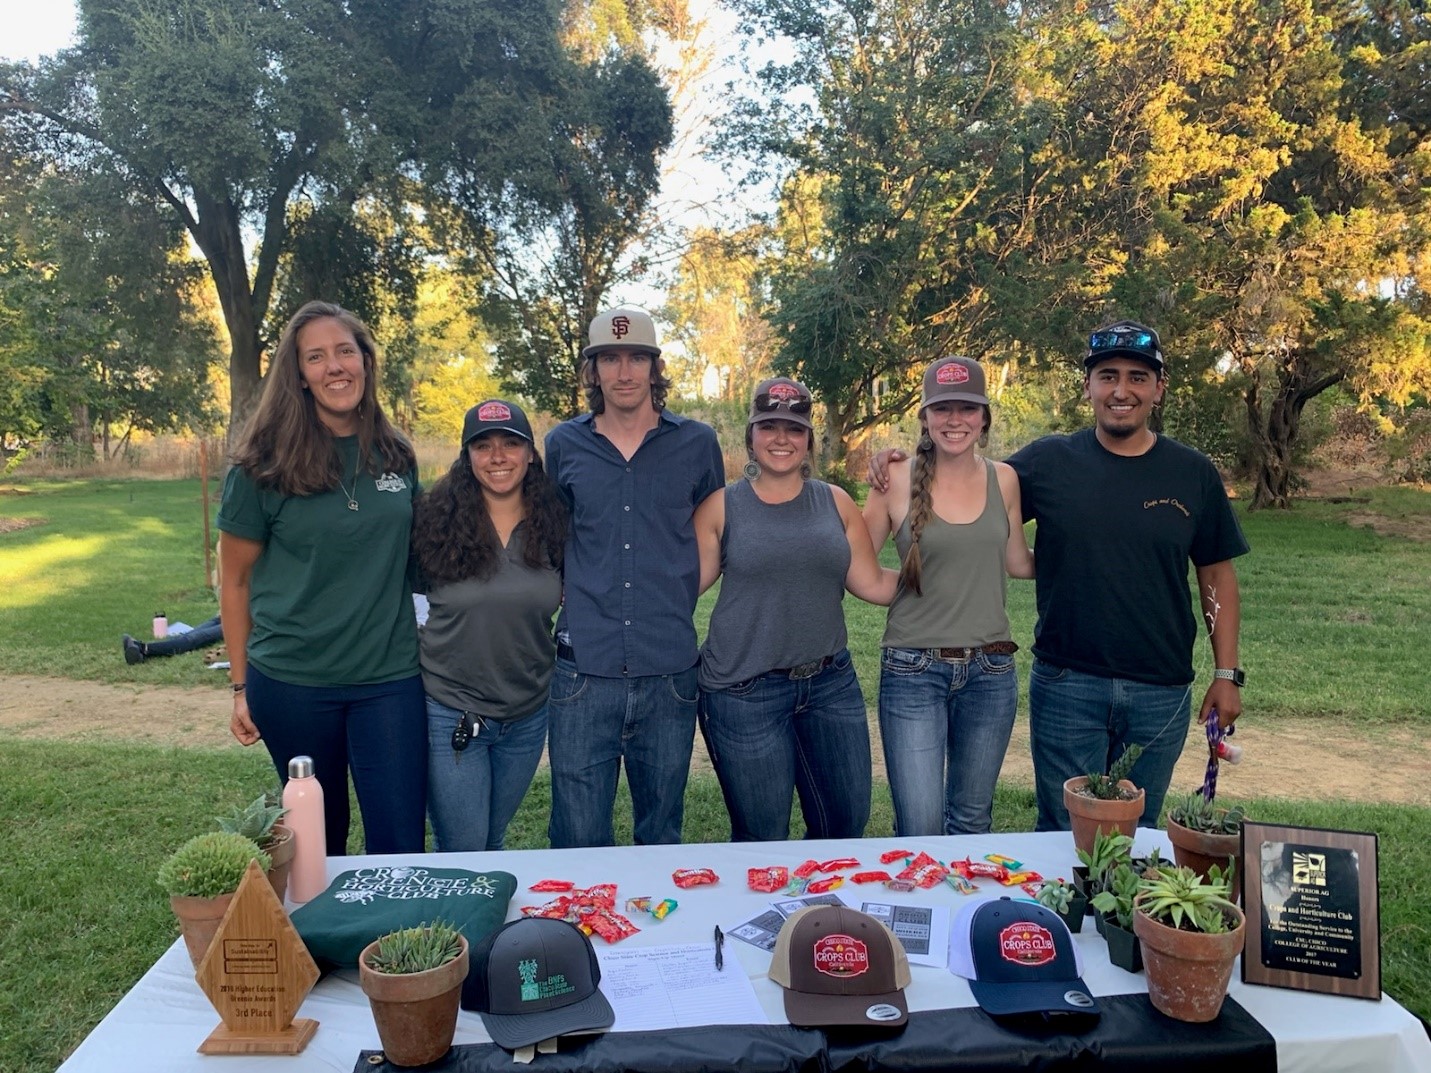 Chico State Crop Science and Horticulture Club